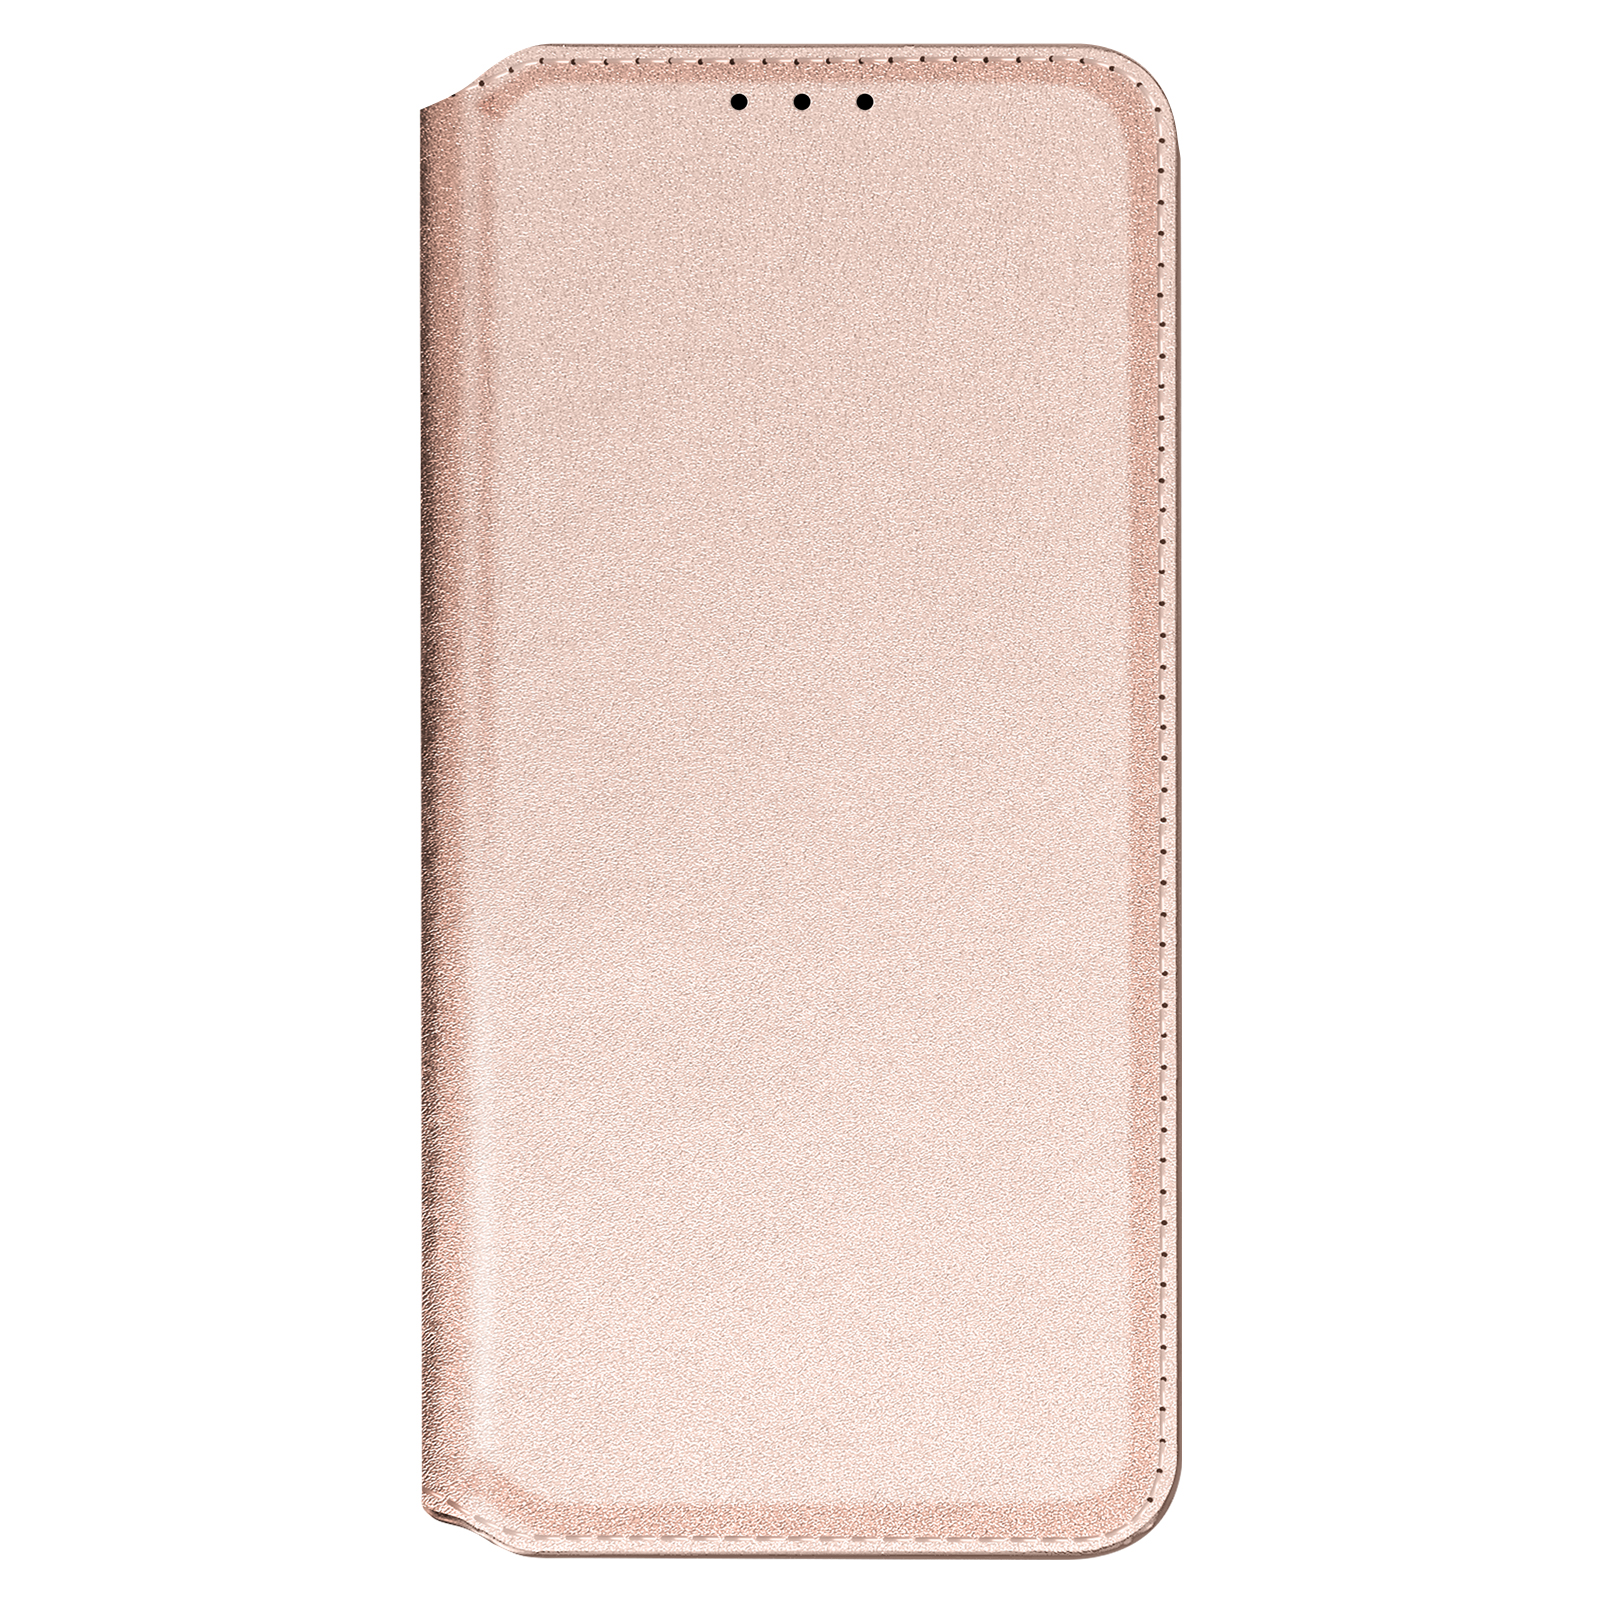 Backcover Wiko Series, Rosegold mit Classic Magnetklappe Y81, Wiko, Edition, AVIZAR Bookcover,